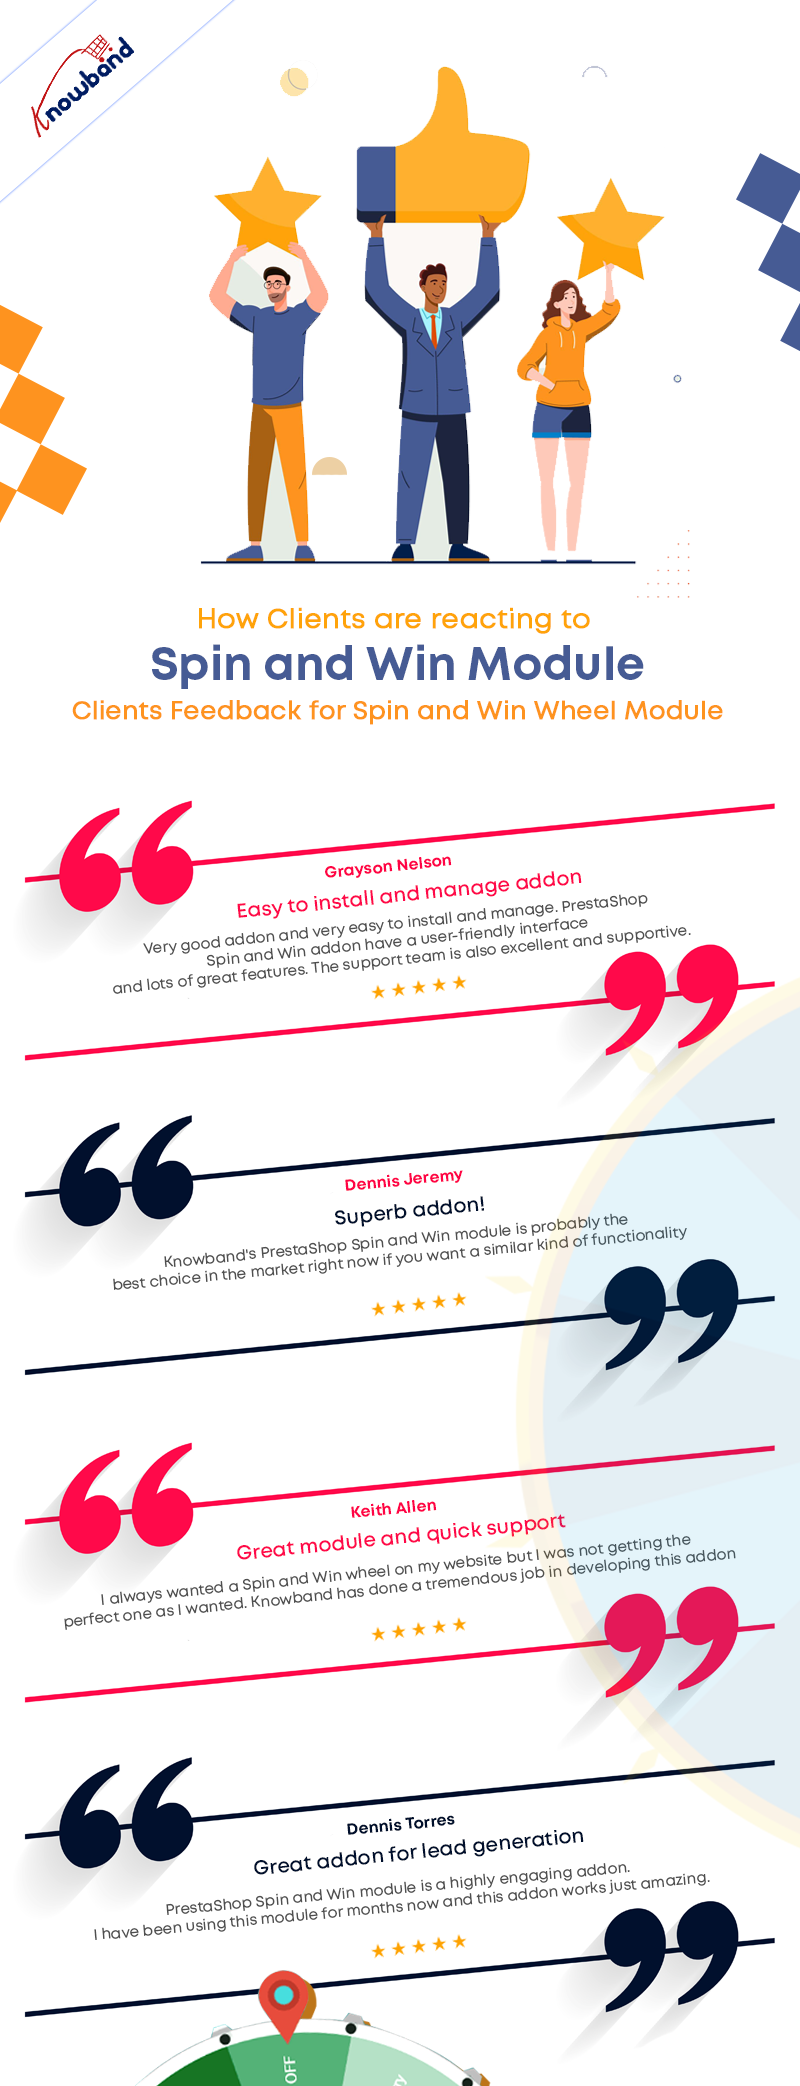 clientes-feedback-for-spin-and-win-wheel-module